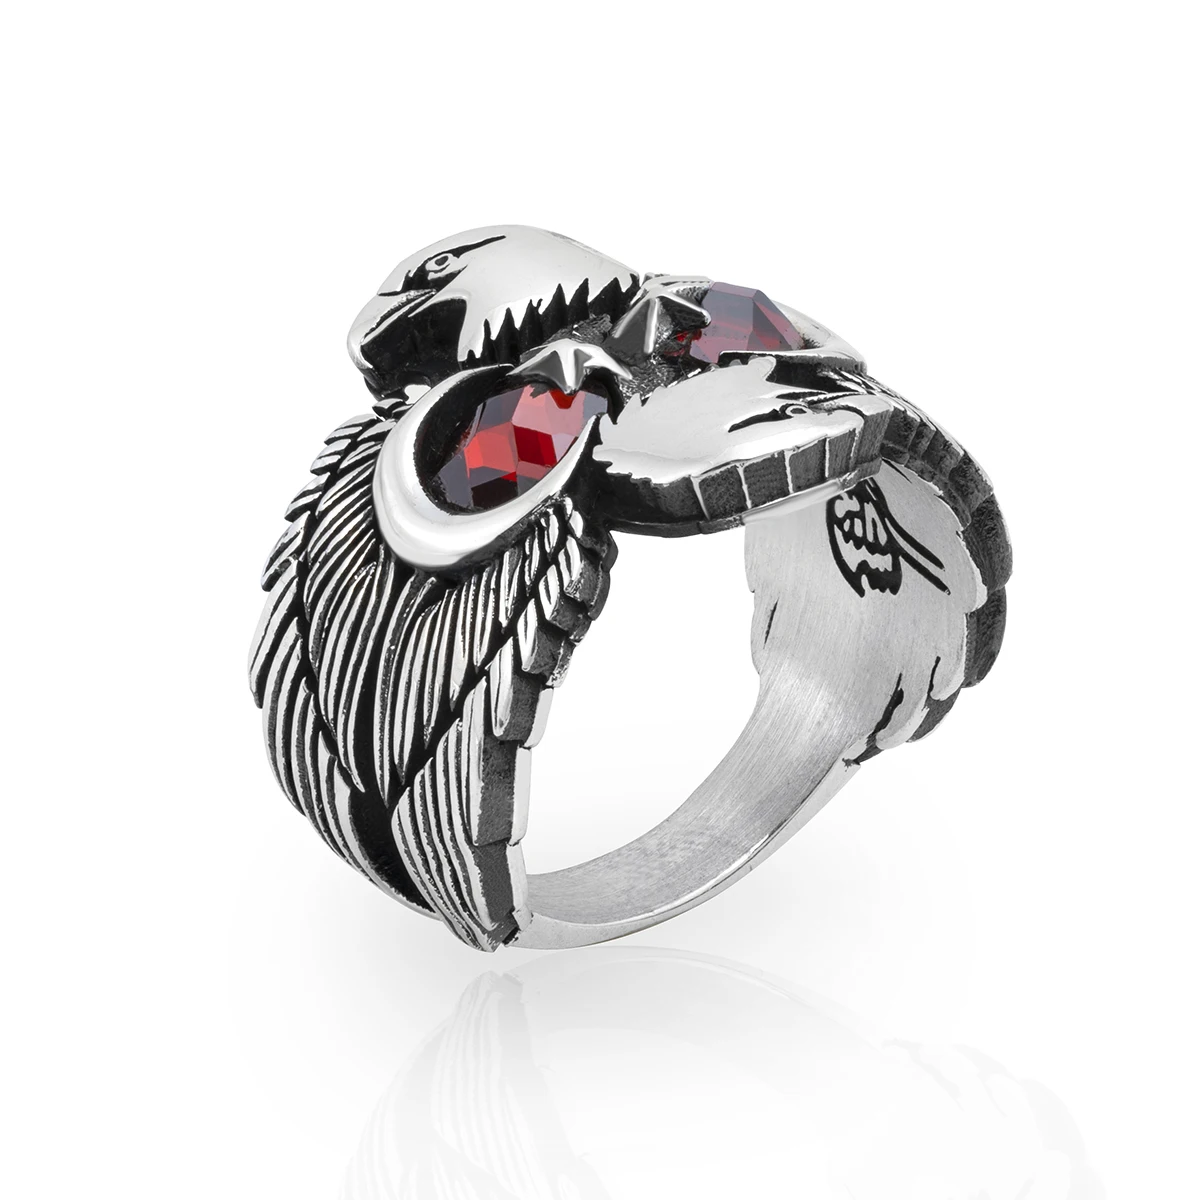 925 Sterling Silver Eglee Figure ring Jewelry Made in Turkey in a luxurious way for men/ wome with gifts Jewelry Fashion Vintage